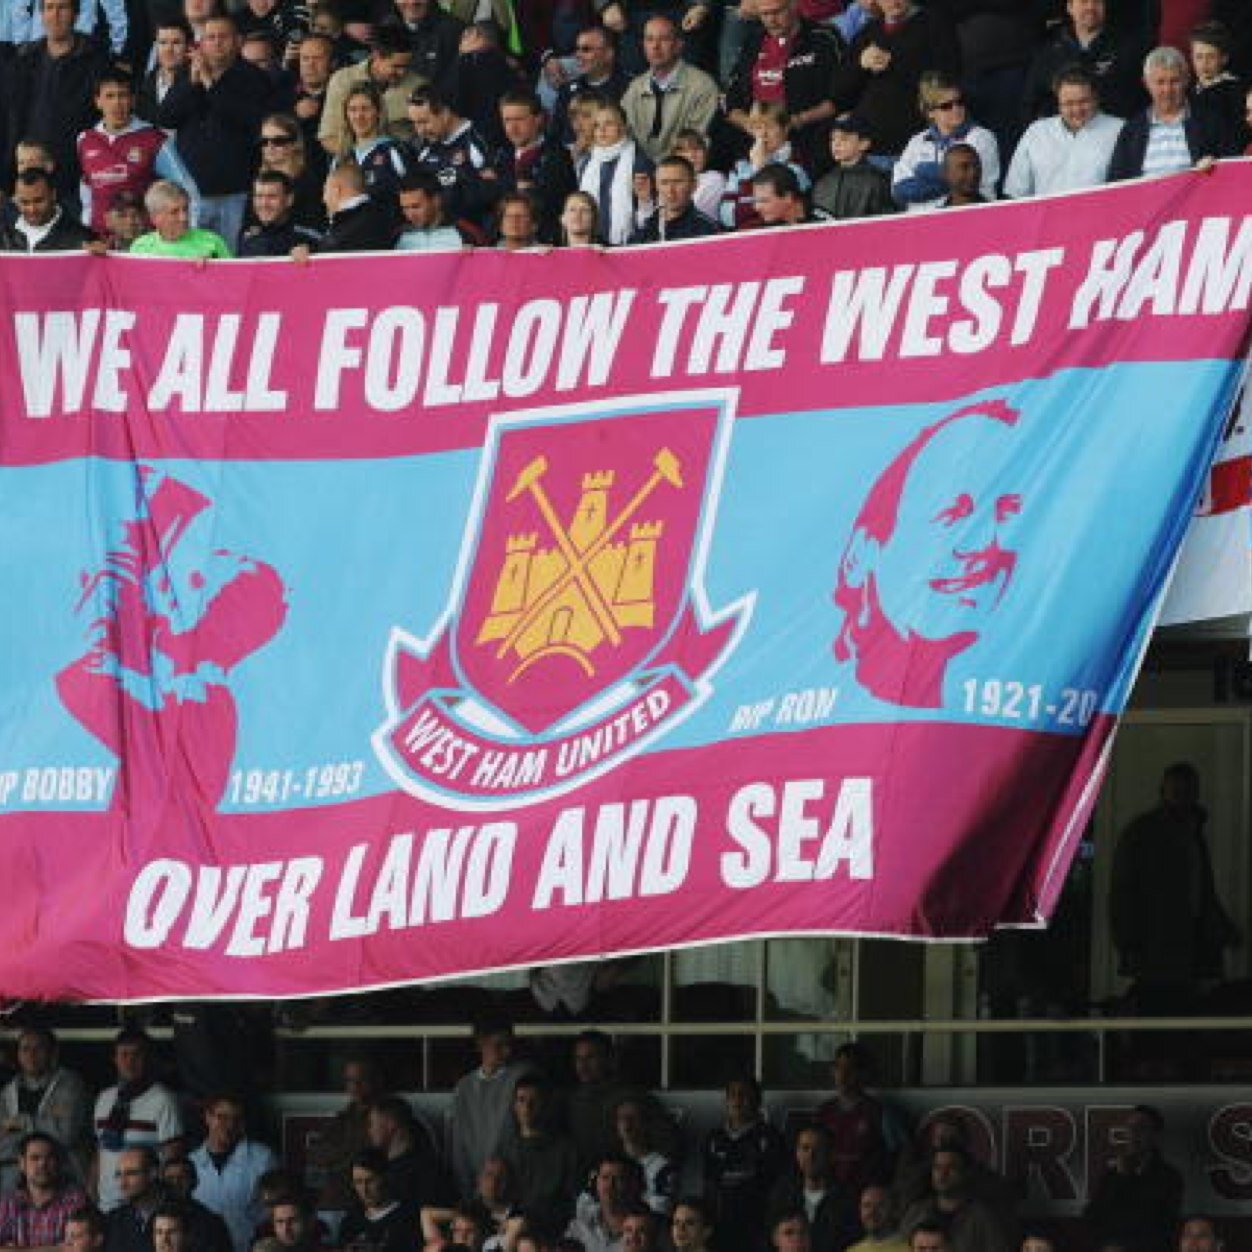 Following The Boys Over Land And Sea COYI